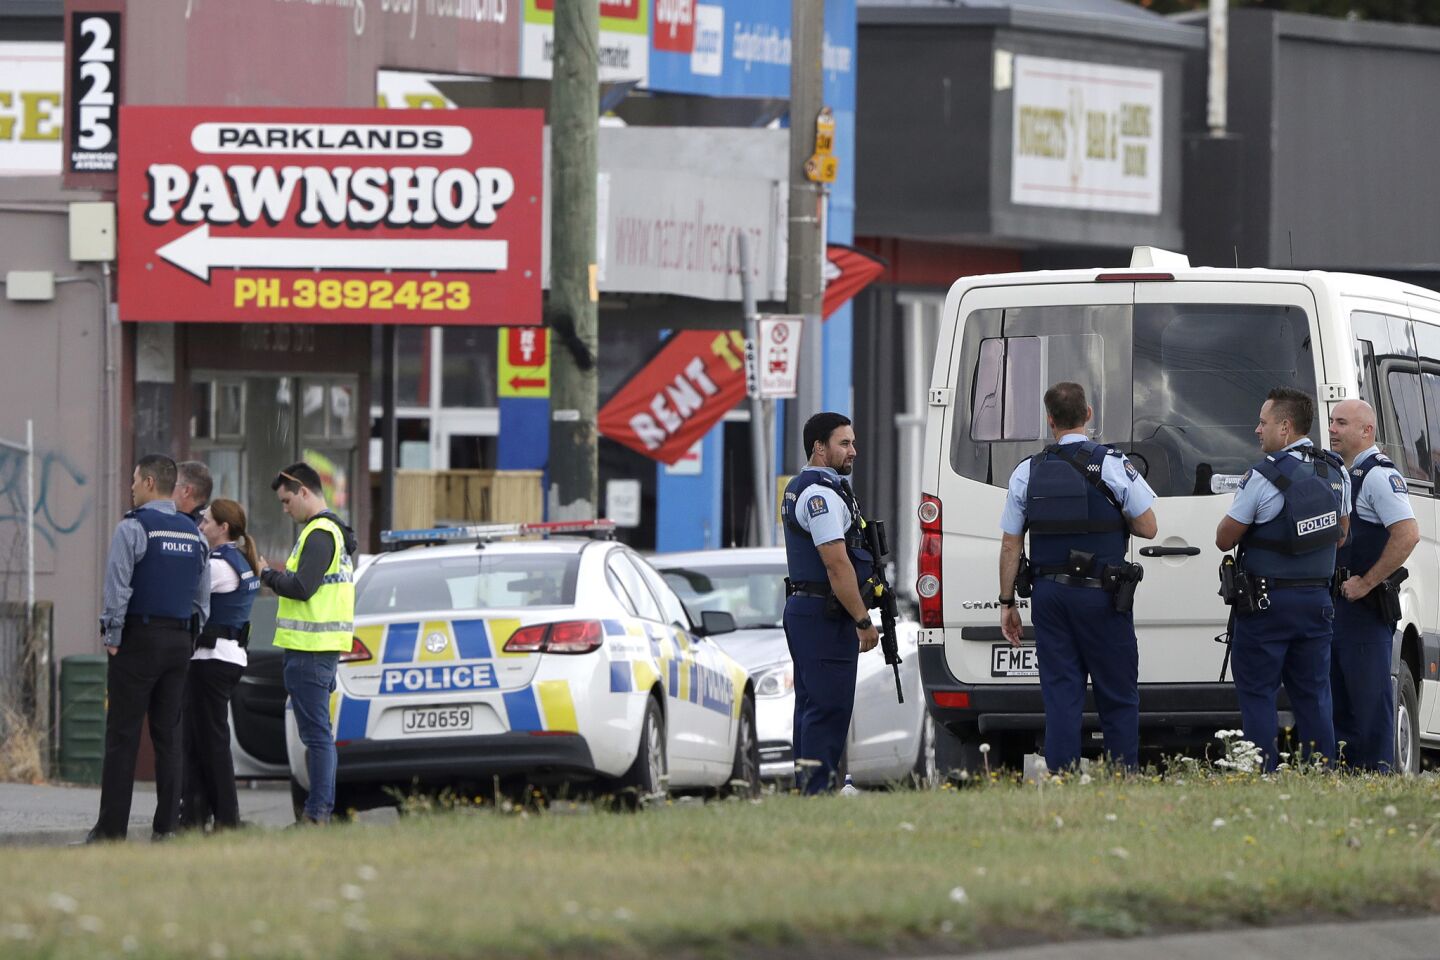 49 killed in terrorist attacks on two New Zealand mosques; suspect charged with murder - Los Angeles Times